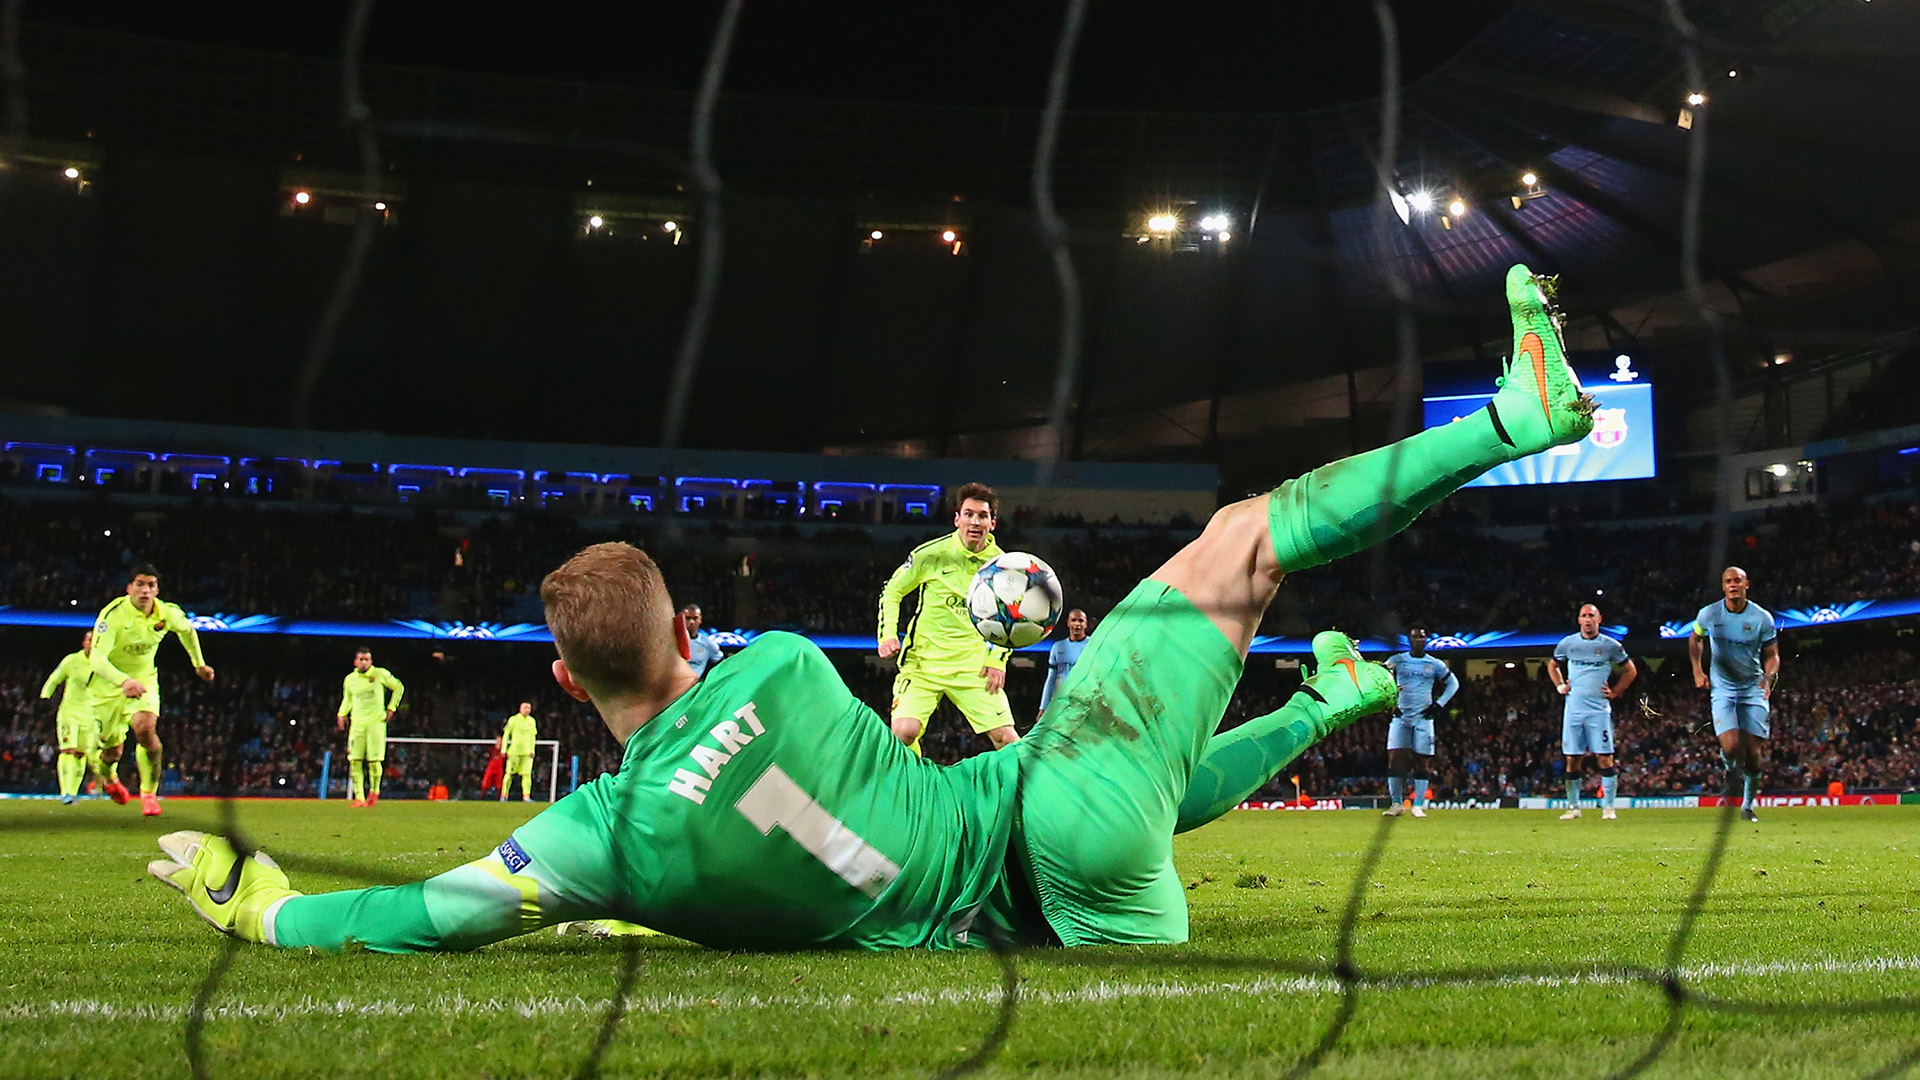 Manchester City S Defeat To Barcelona Is A Tale Of Two Cities